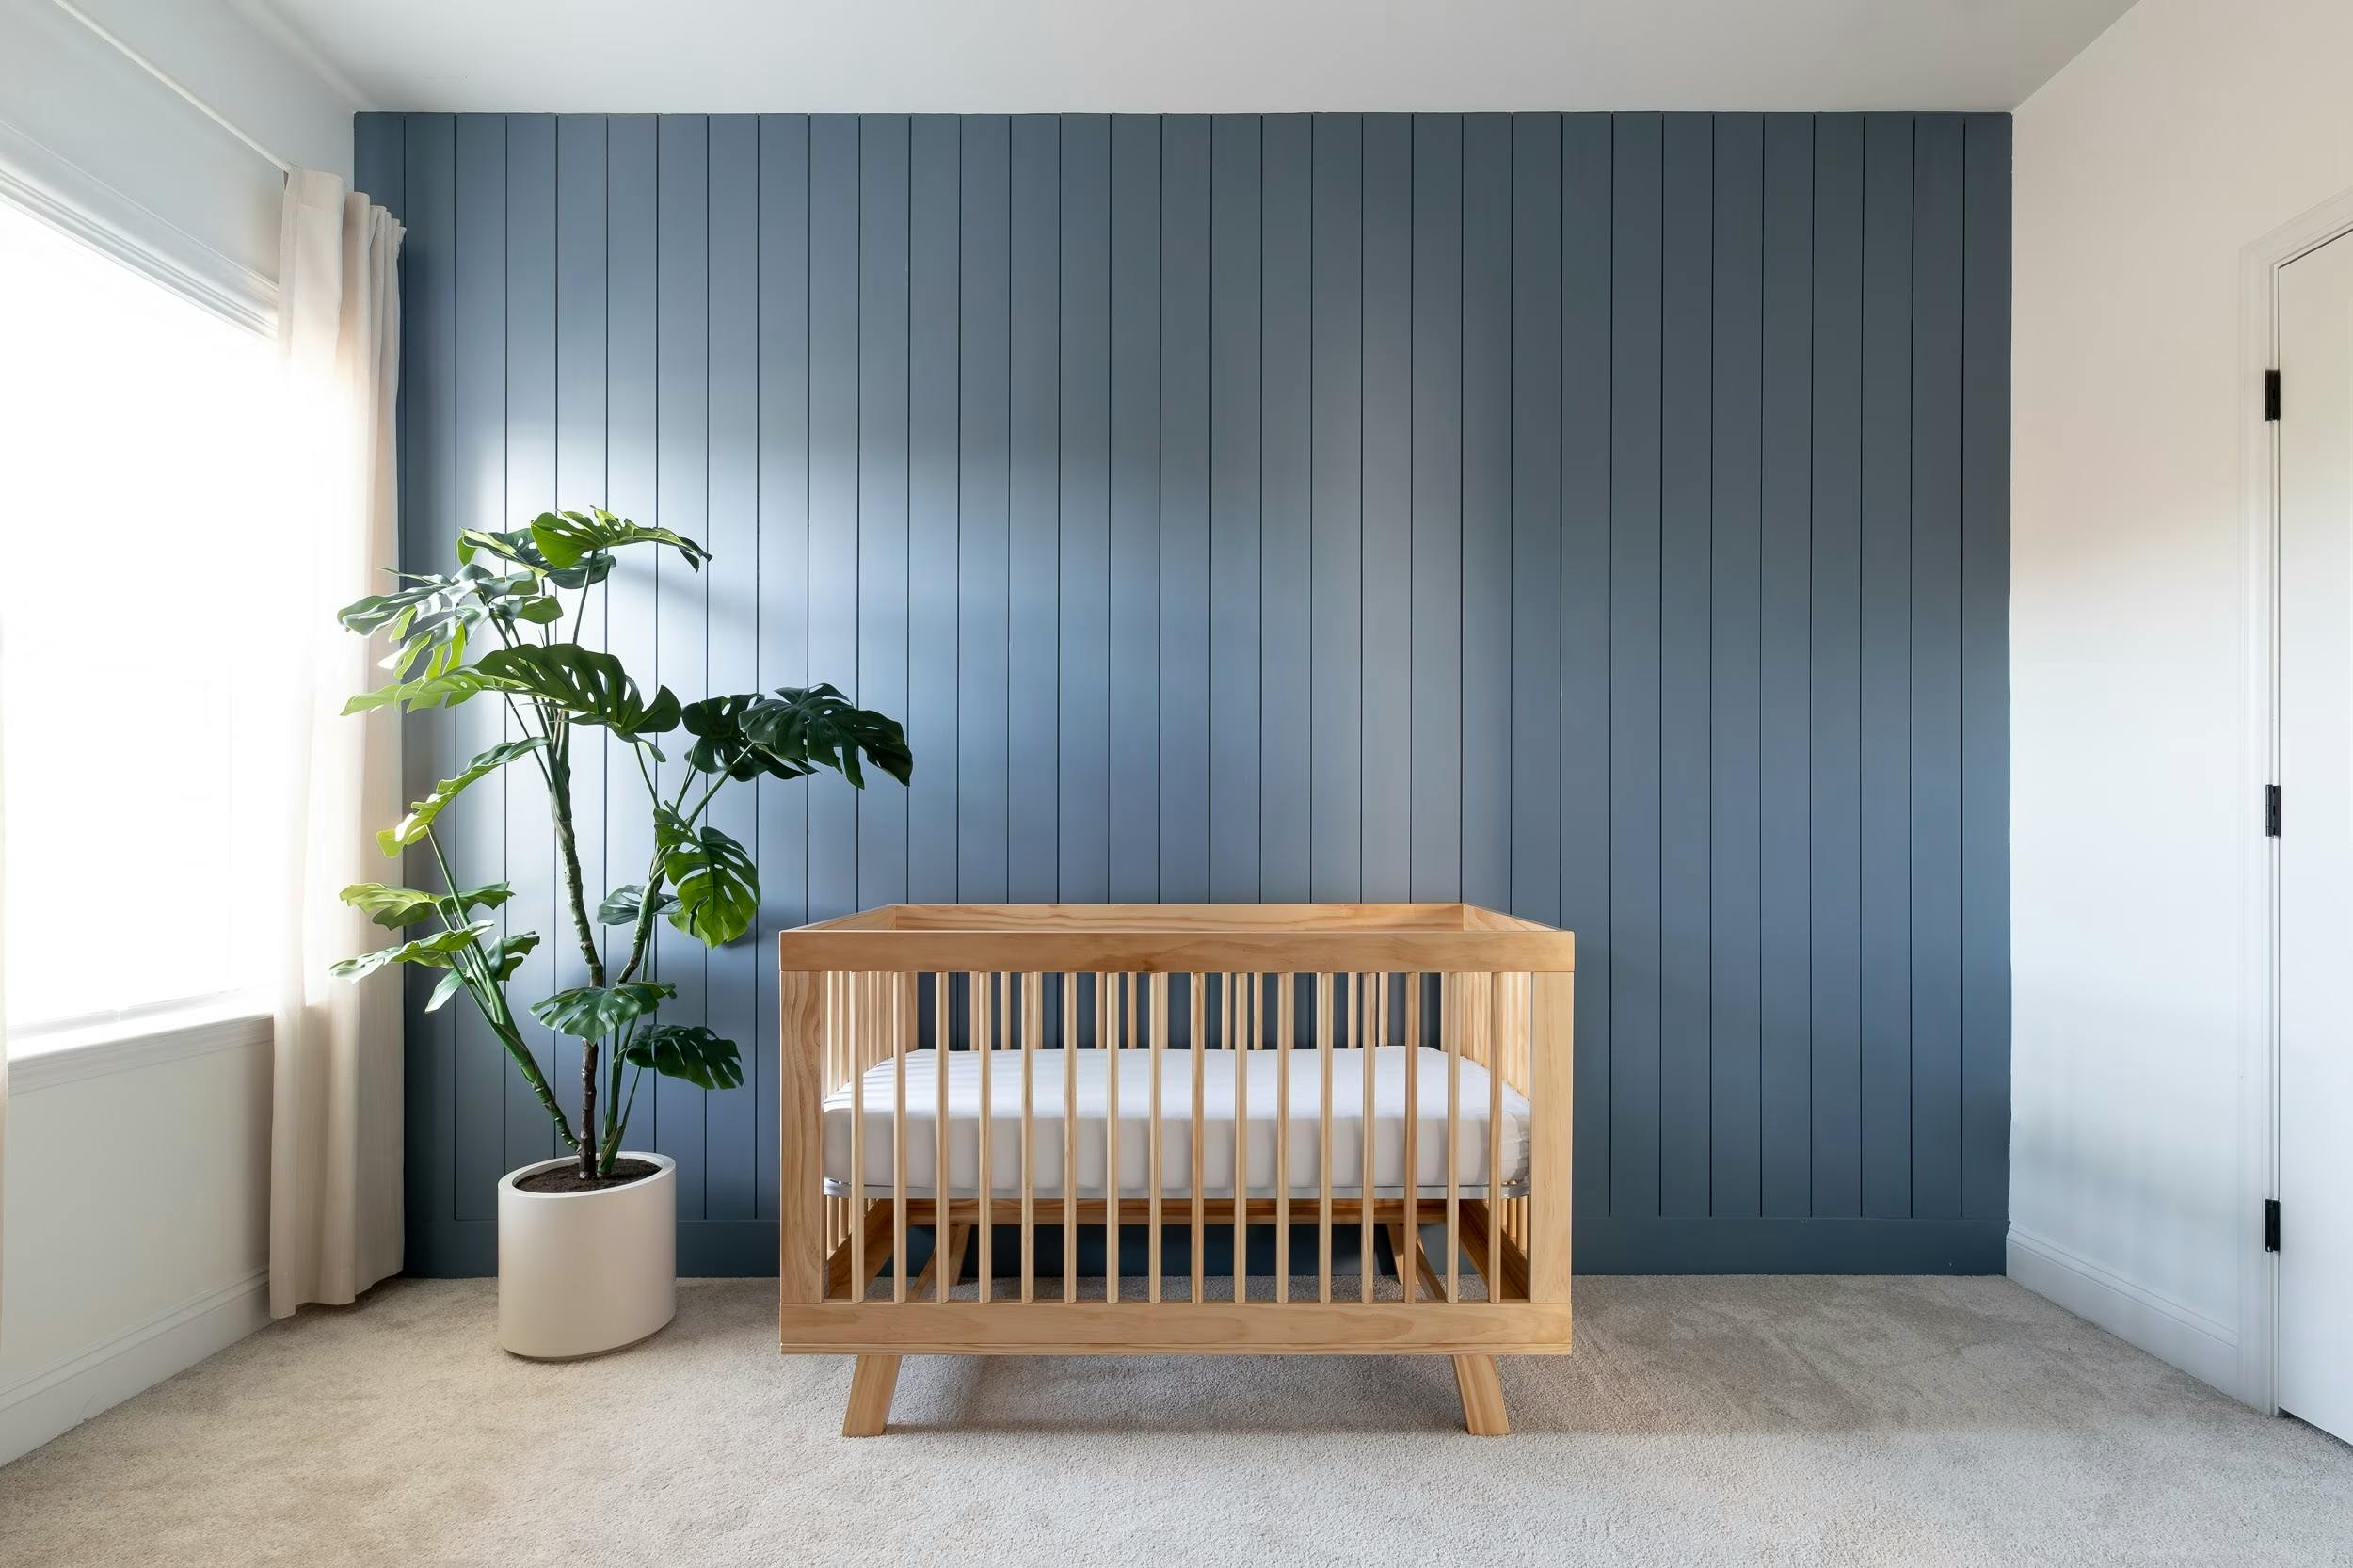 This Charlotte nursery was painted by Craftwork in Bachelor Blue 1629 by Benjamin Moore.